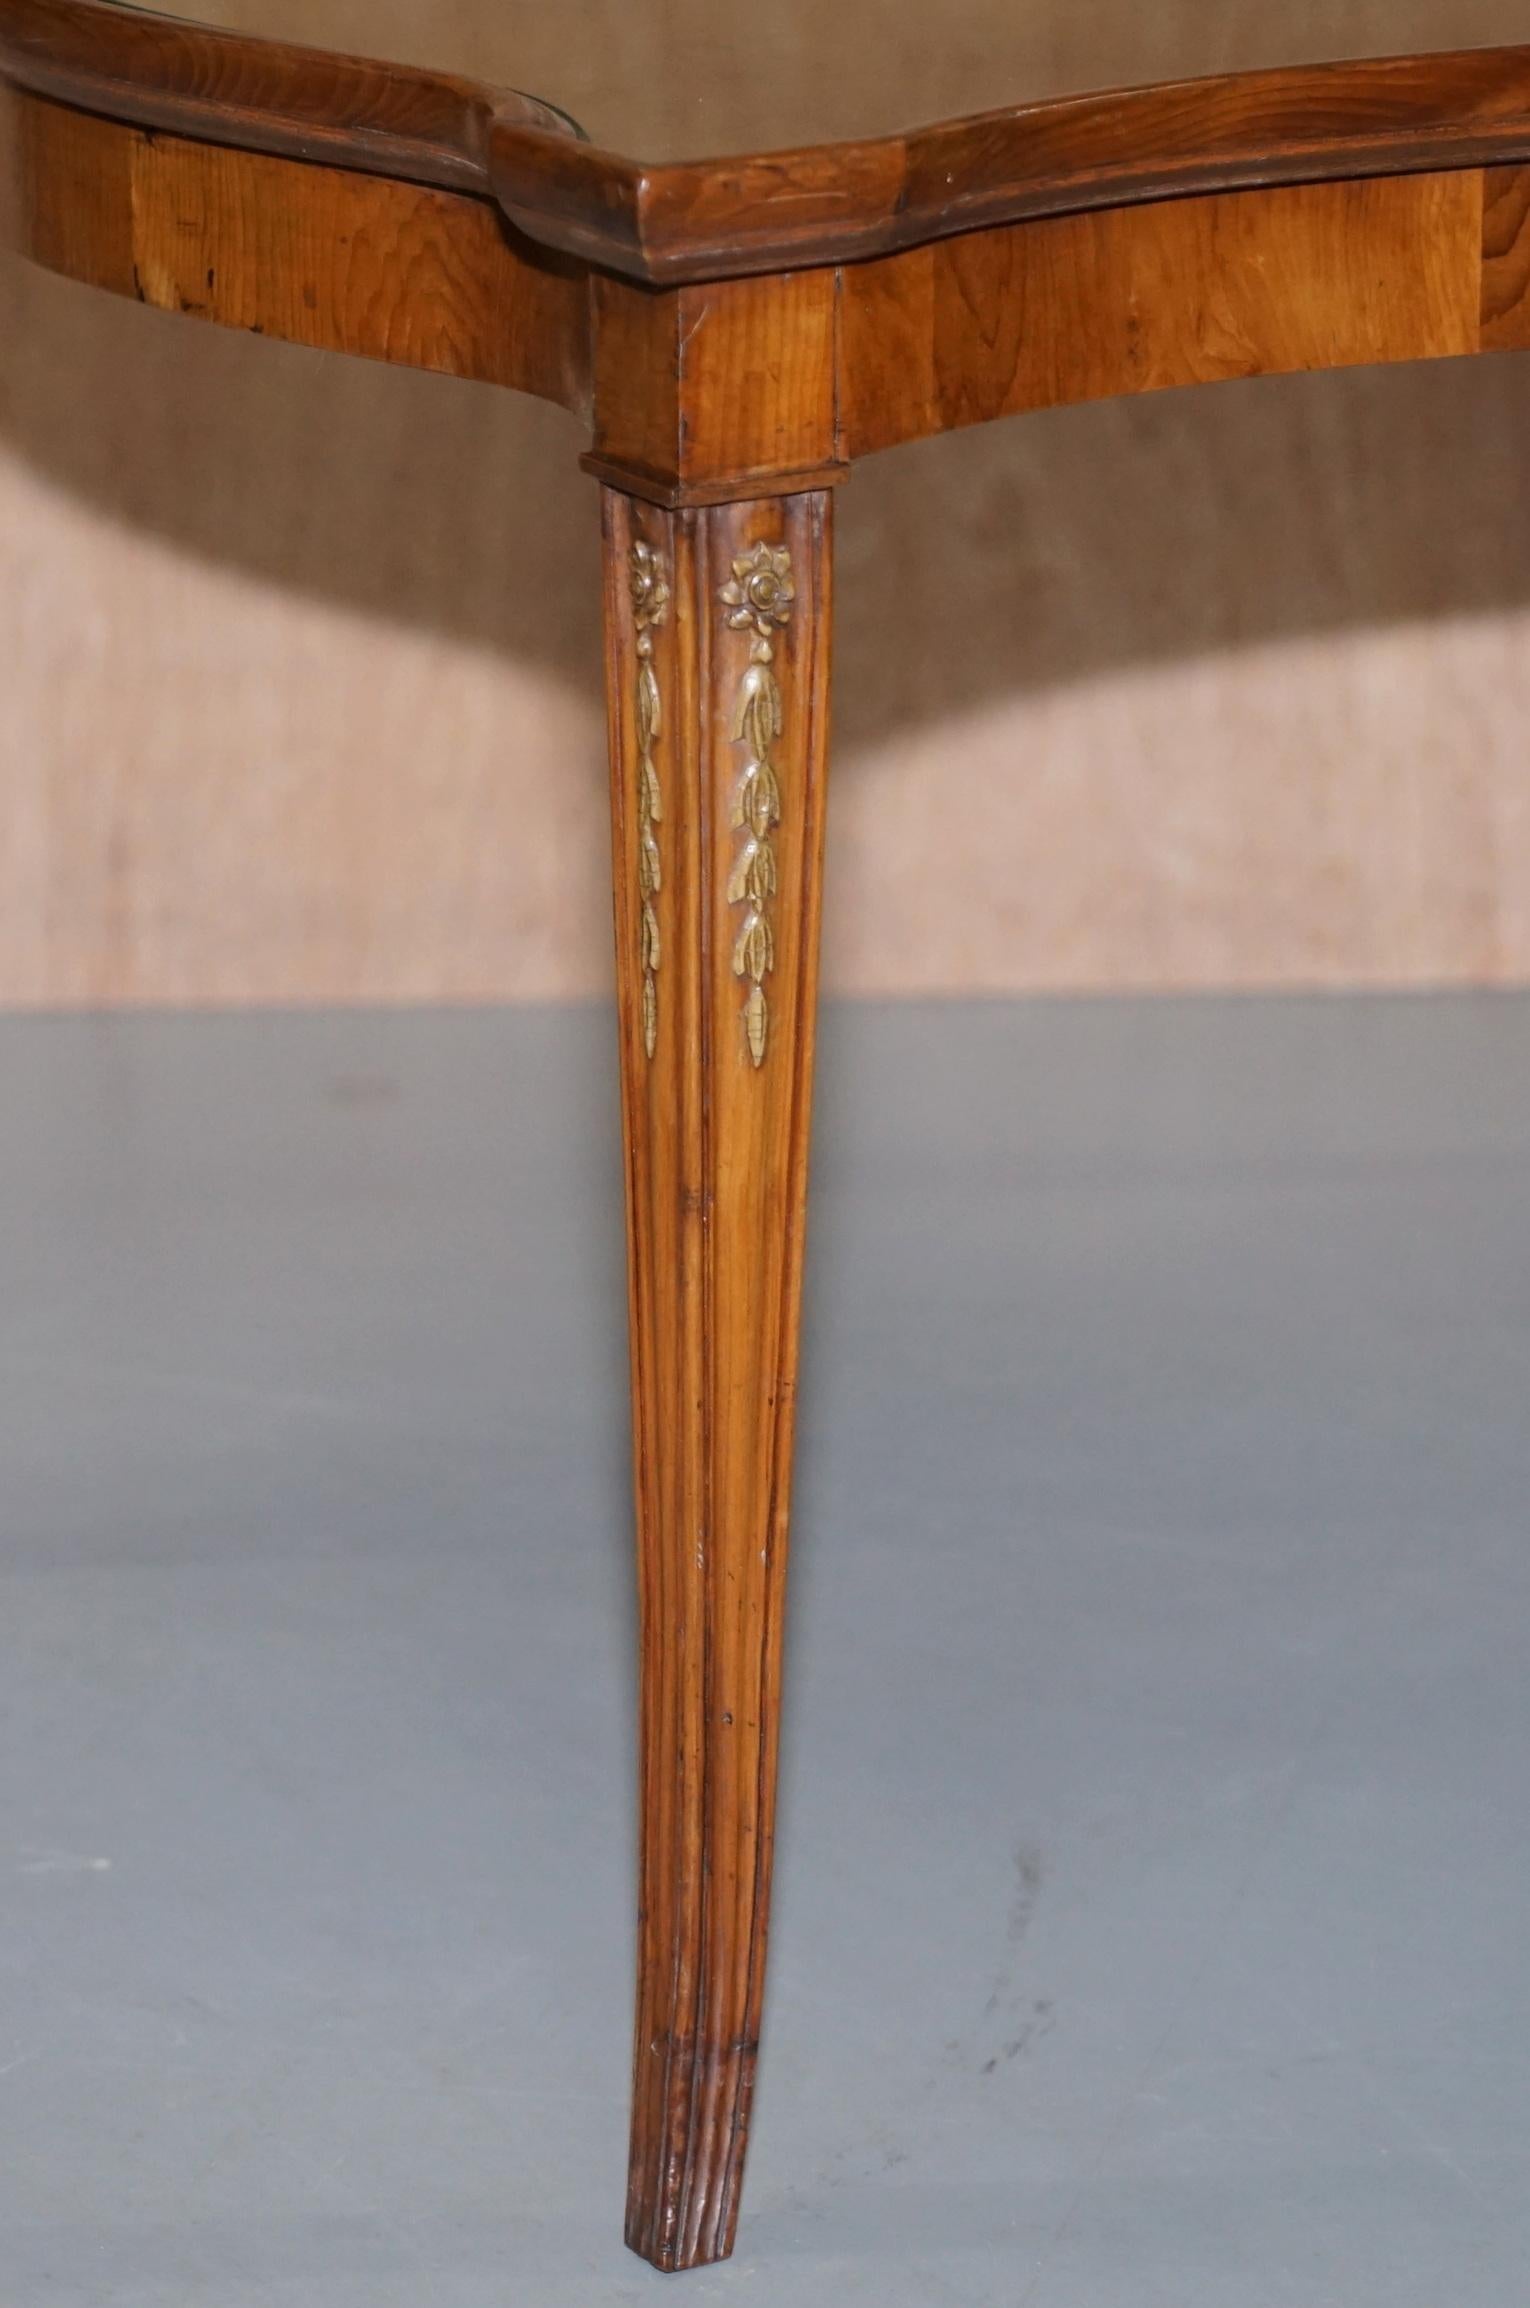 Hand-Crafted Pair of Burr Yew Wood Ornately Crafted Side End Lamp Wine Tables, a Lovely Pair